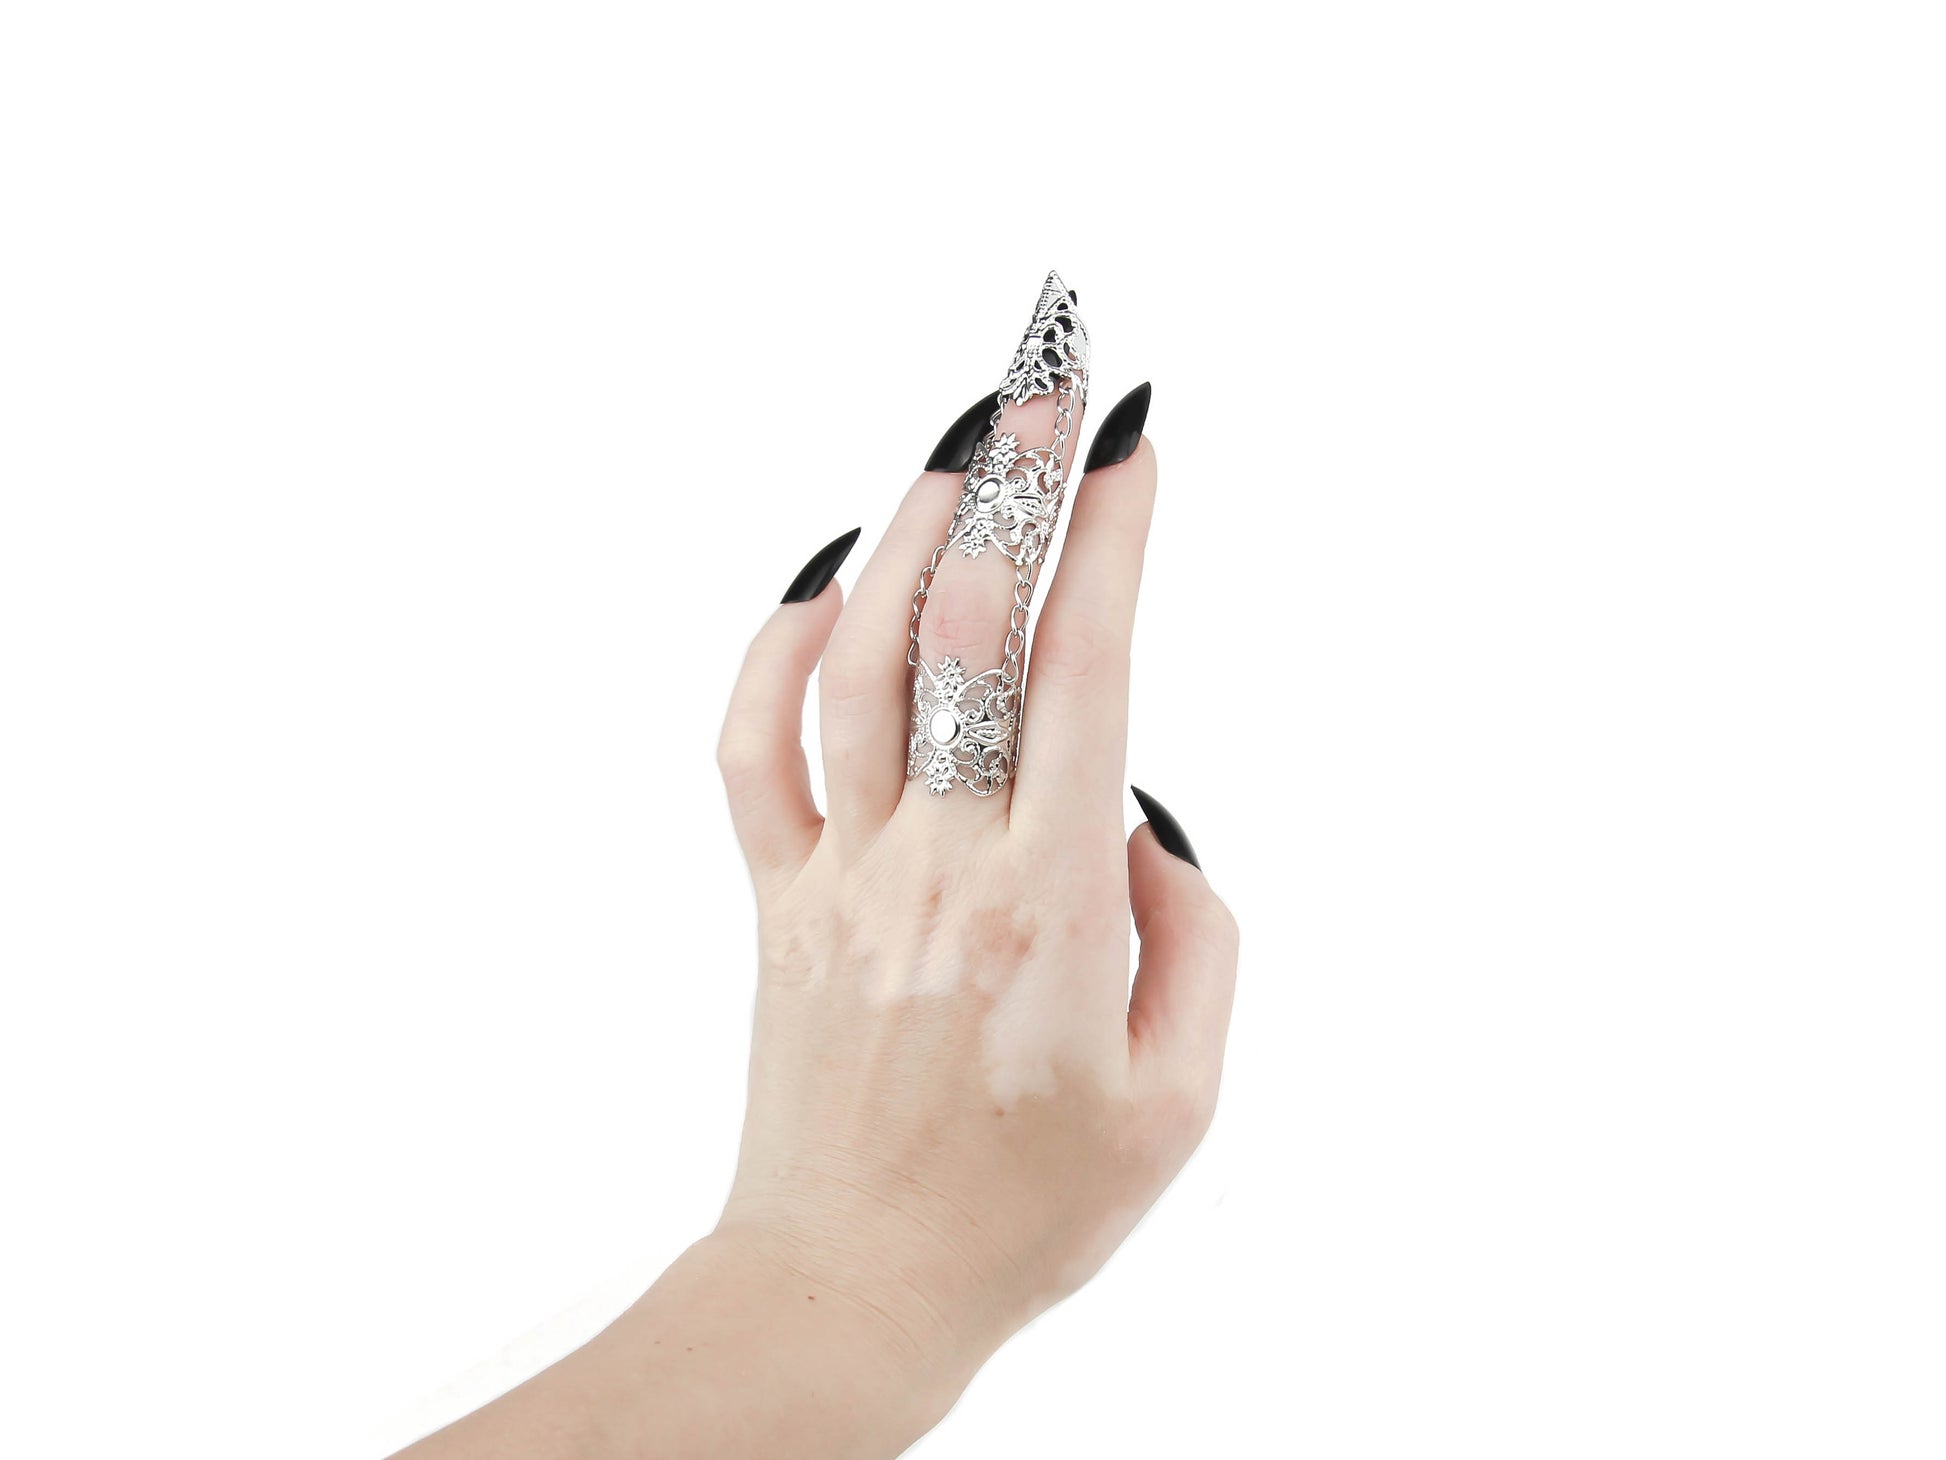 A hand adorned with Myril Jewels' full finger silver claw ring, a dark and intricate piece perfect for a neo-gothic look. This bold jewelry aligns with witchcore and gothic-chic trends, making it an ideal choice for Halloween, a rave party accessory, or a unique goth girlfriend gift